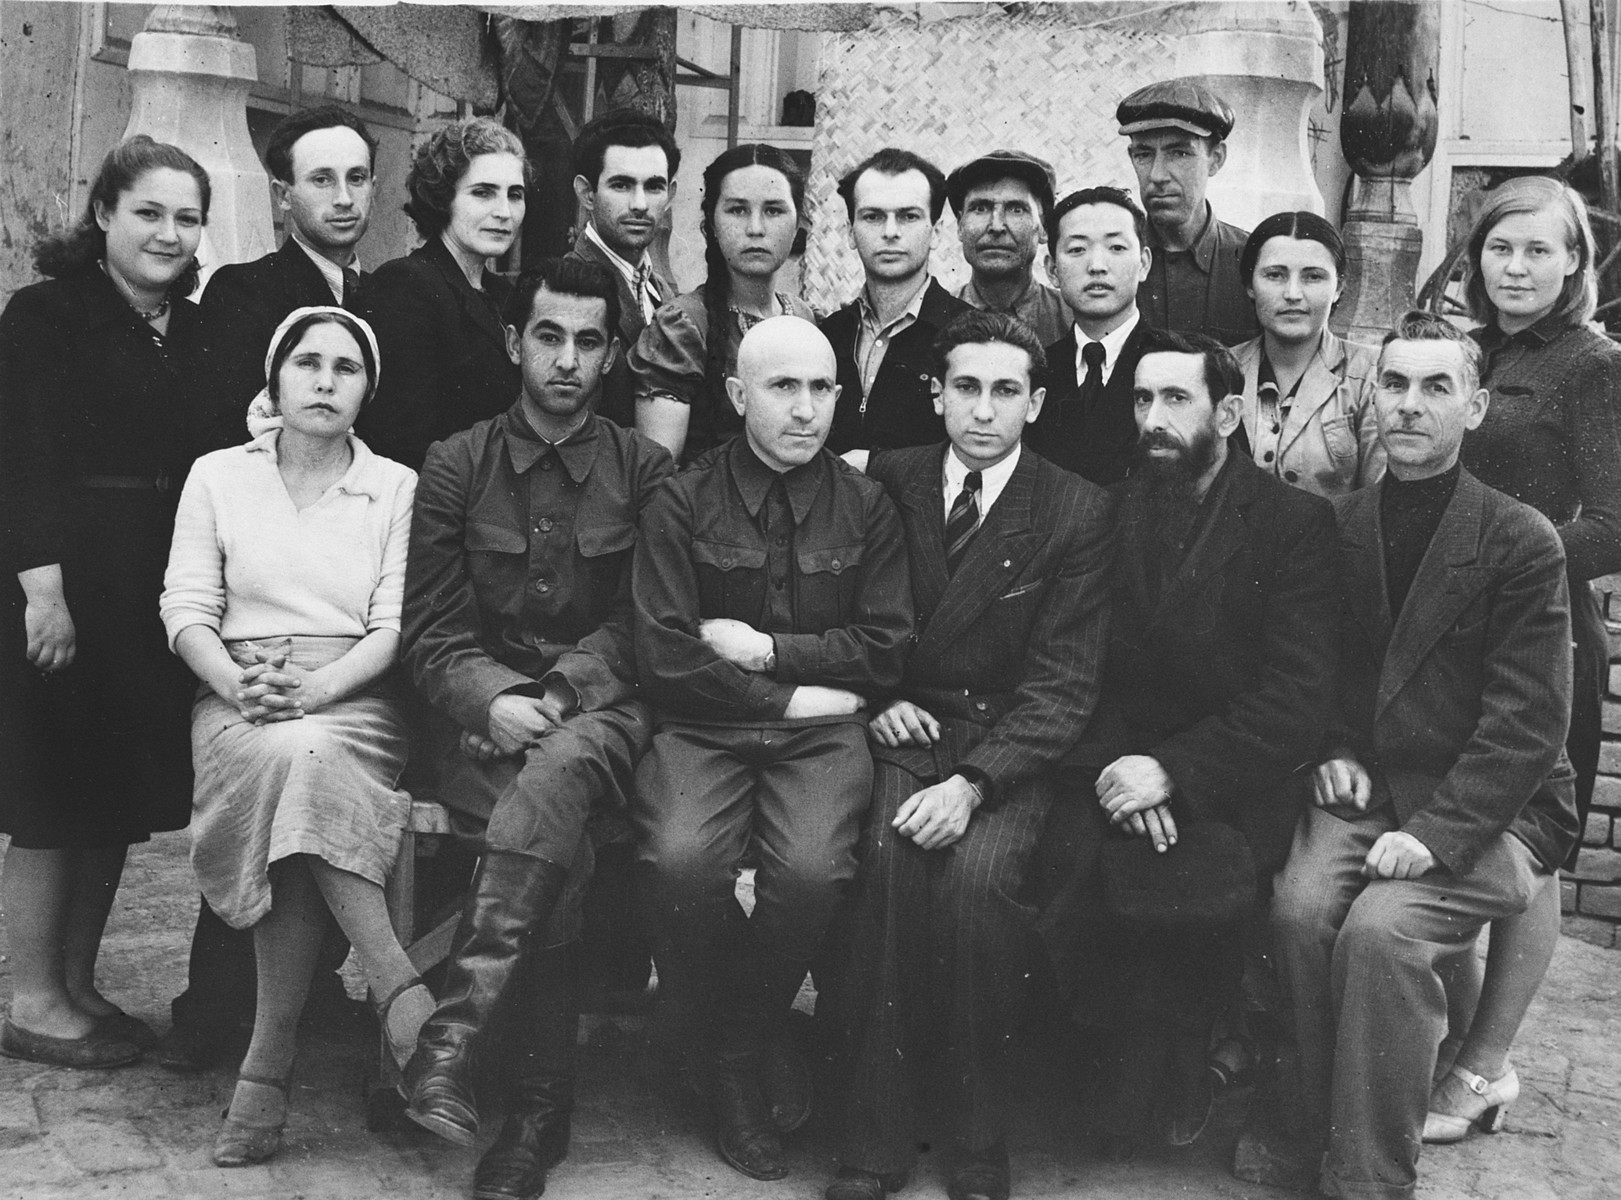 Group portrait of members of a Soviet collective in Samarkand.

Pictured in the center is Marjan Ratner.